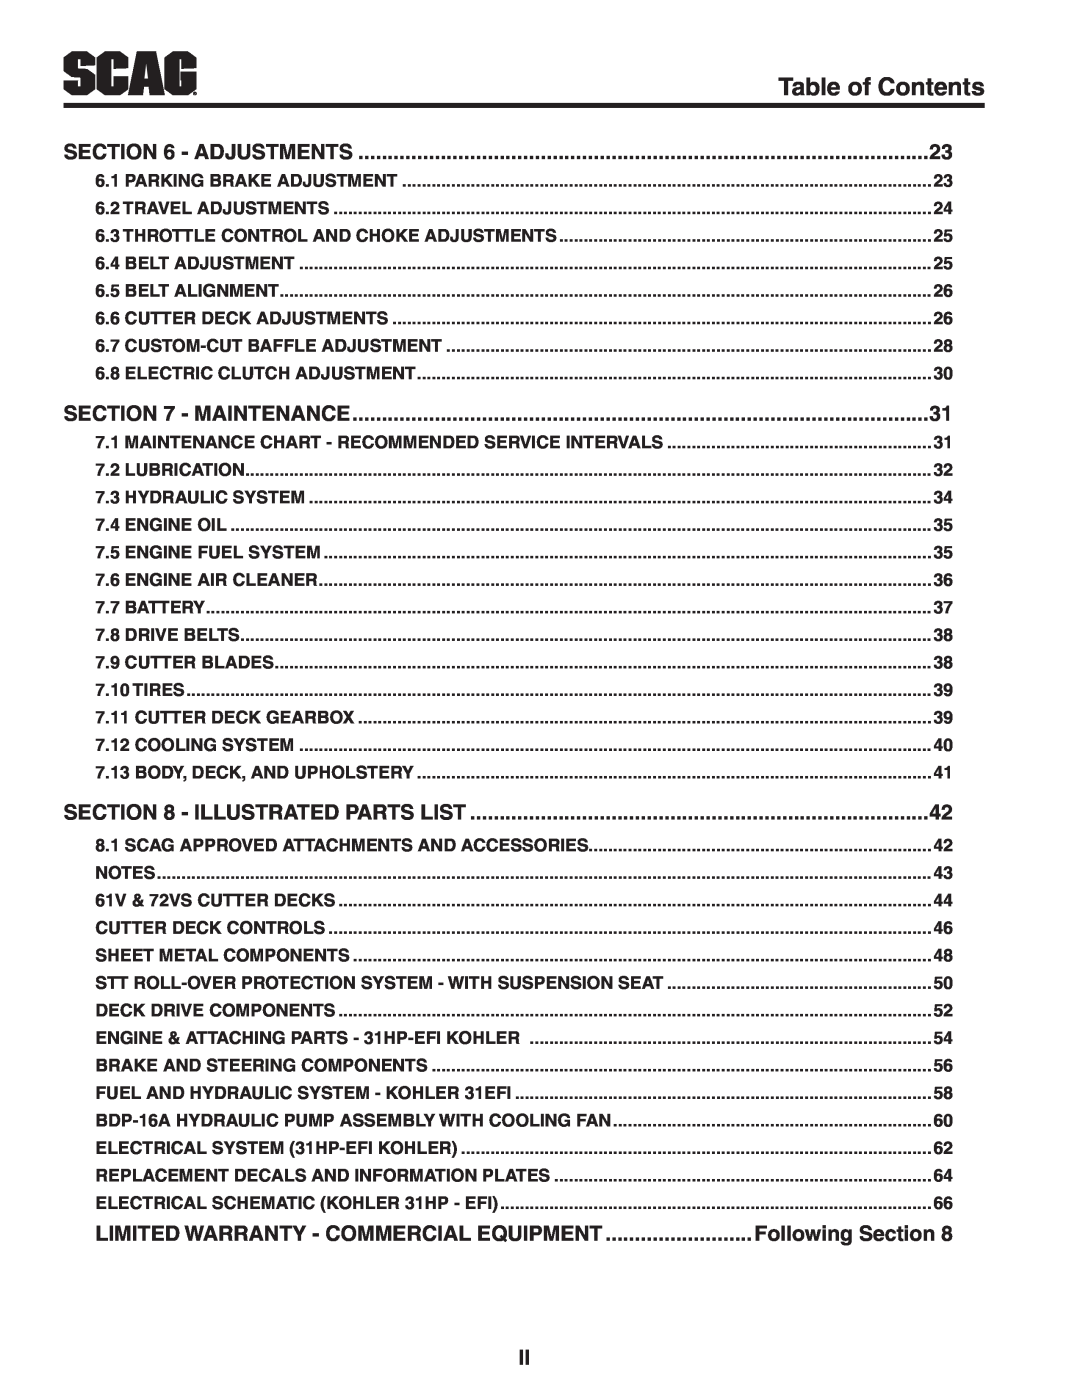 Scag Power Equipment STT-31EFI-SS Limited Warranty - Commercial Equipment, Following Section, Table of Contents 